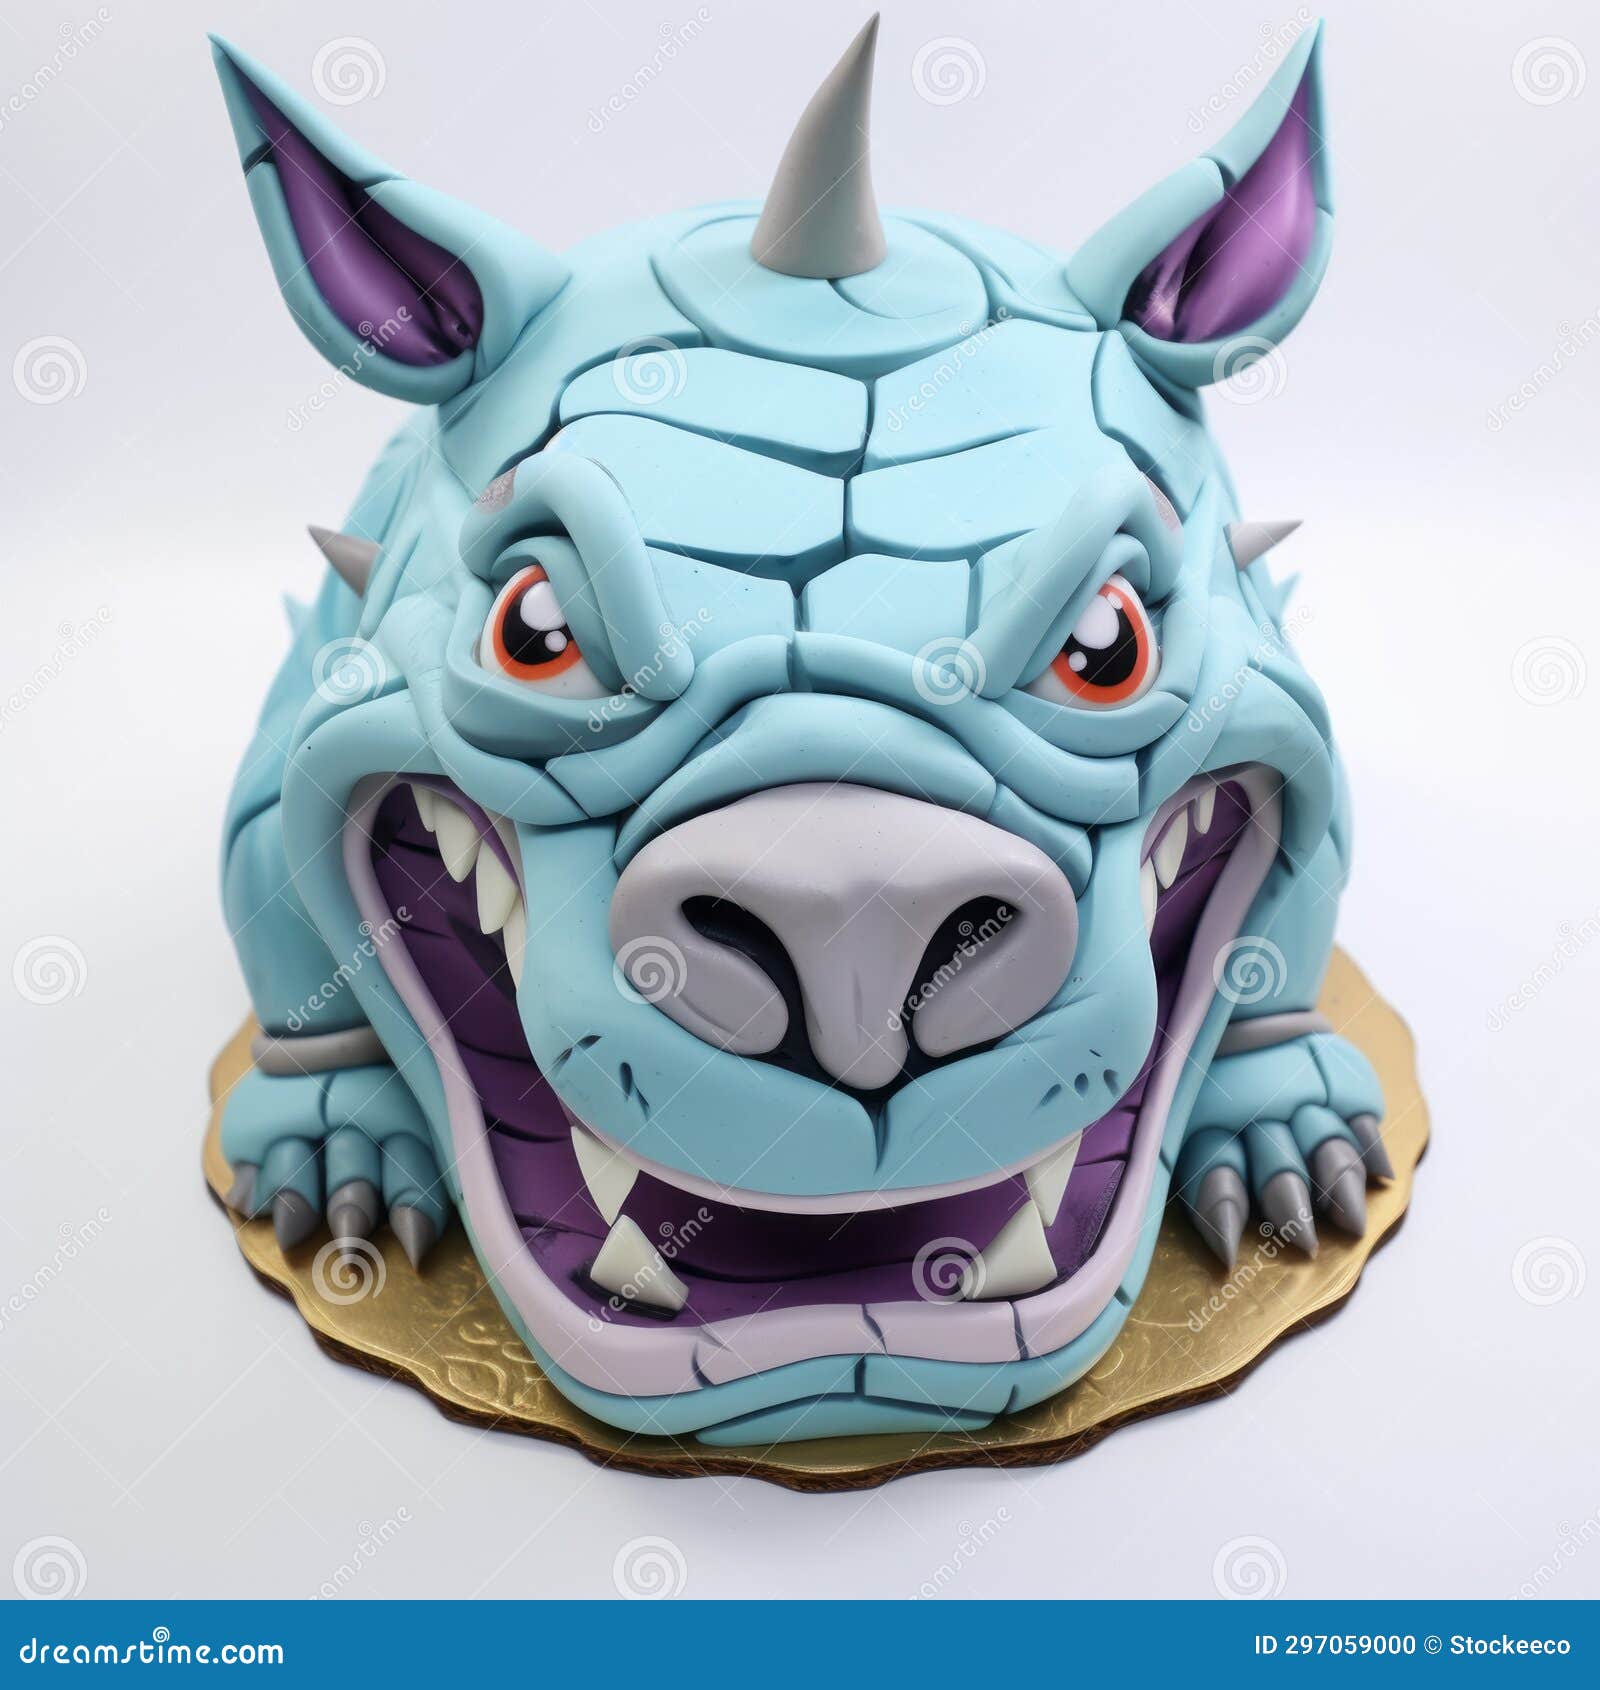 dragon cake: a cartoon realism masterpiece with caninecore vibes